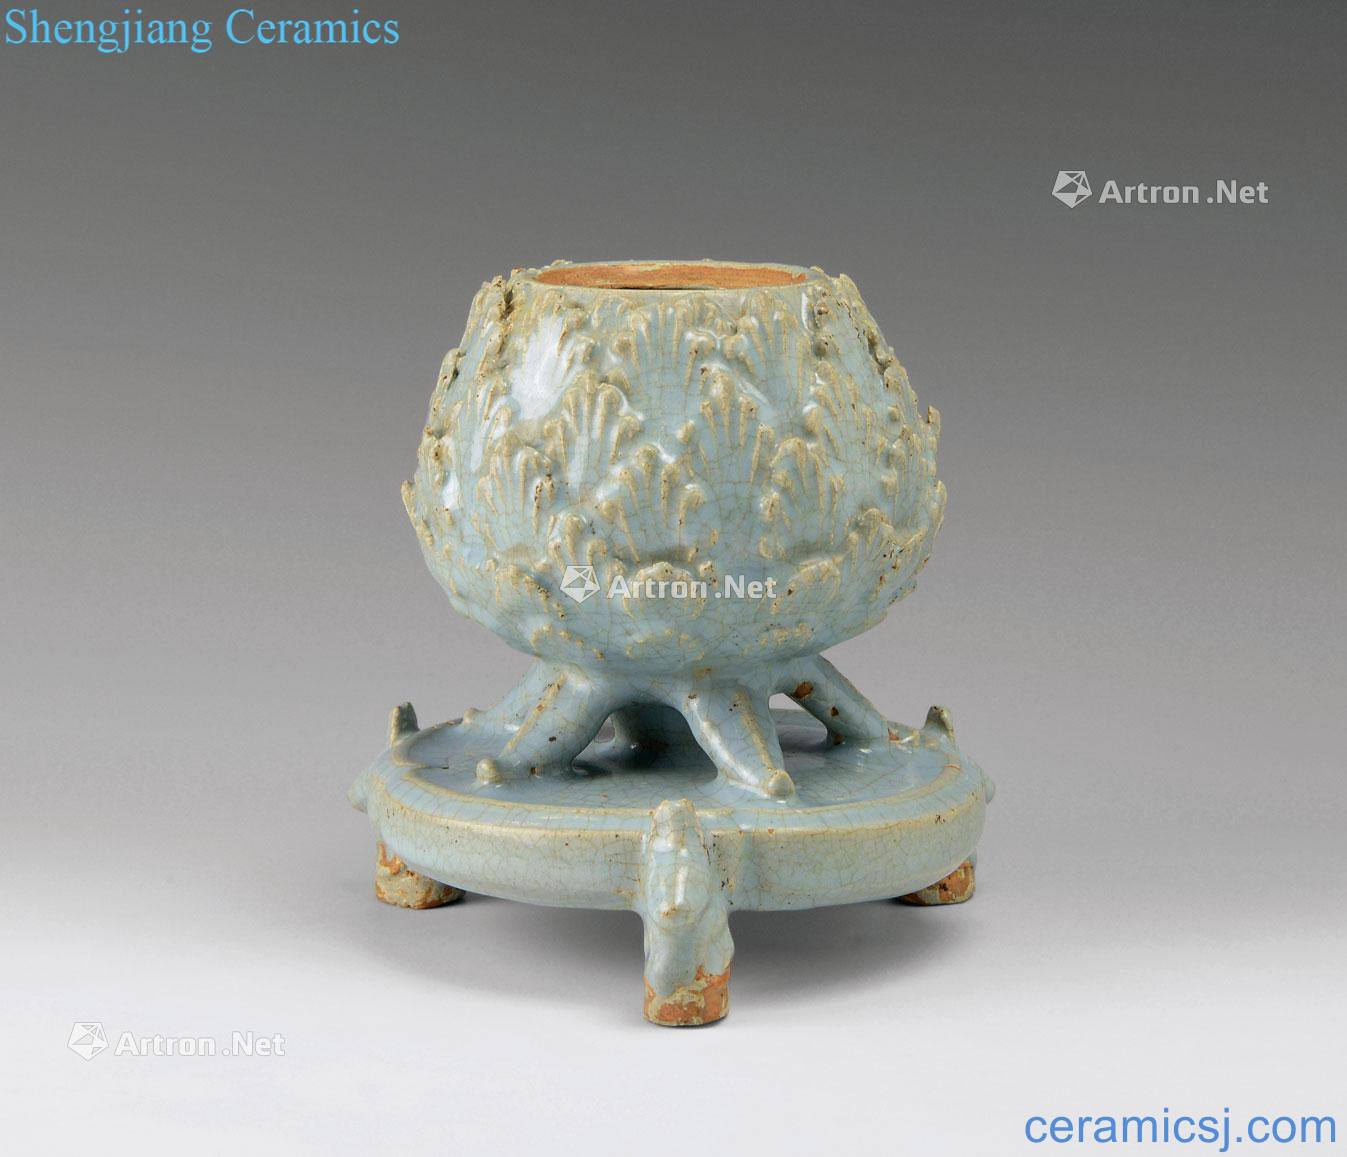 The song dynasty Lotus sweet fume masterpieces